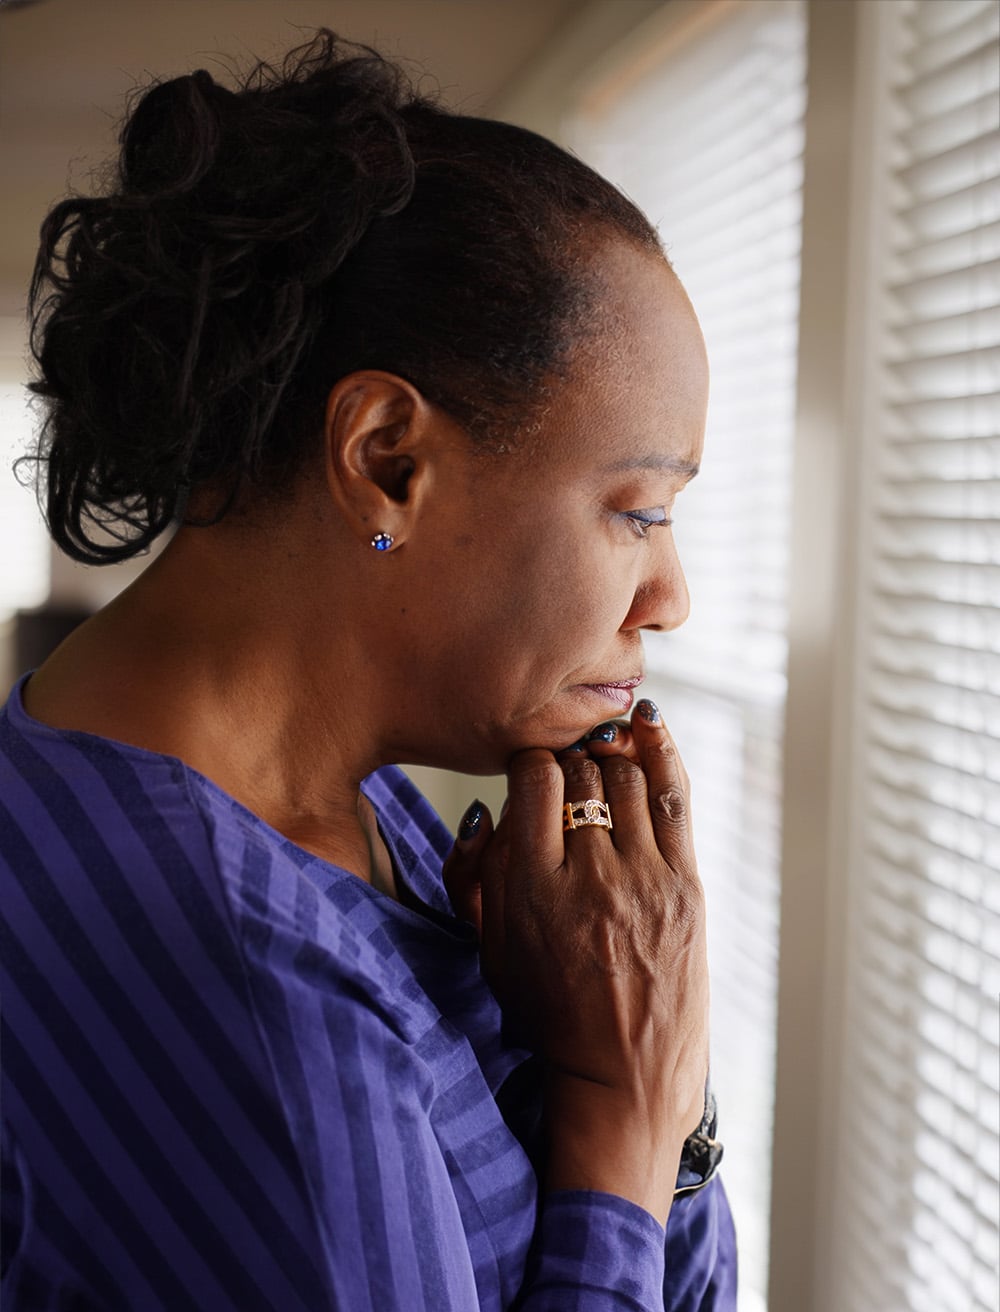 Woman grieves her mother's passing and probate situation